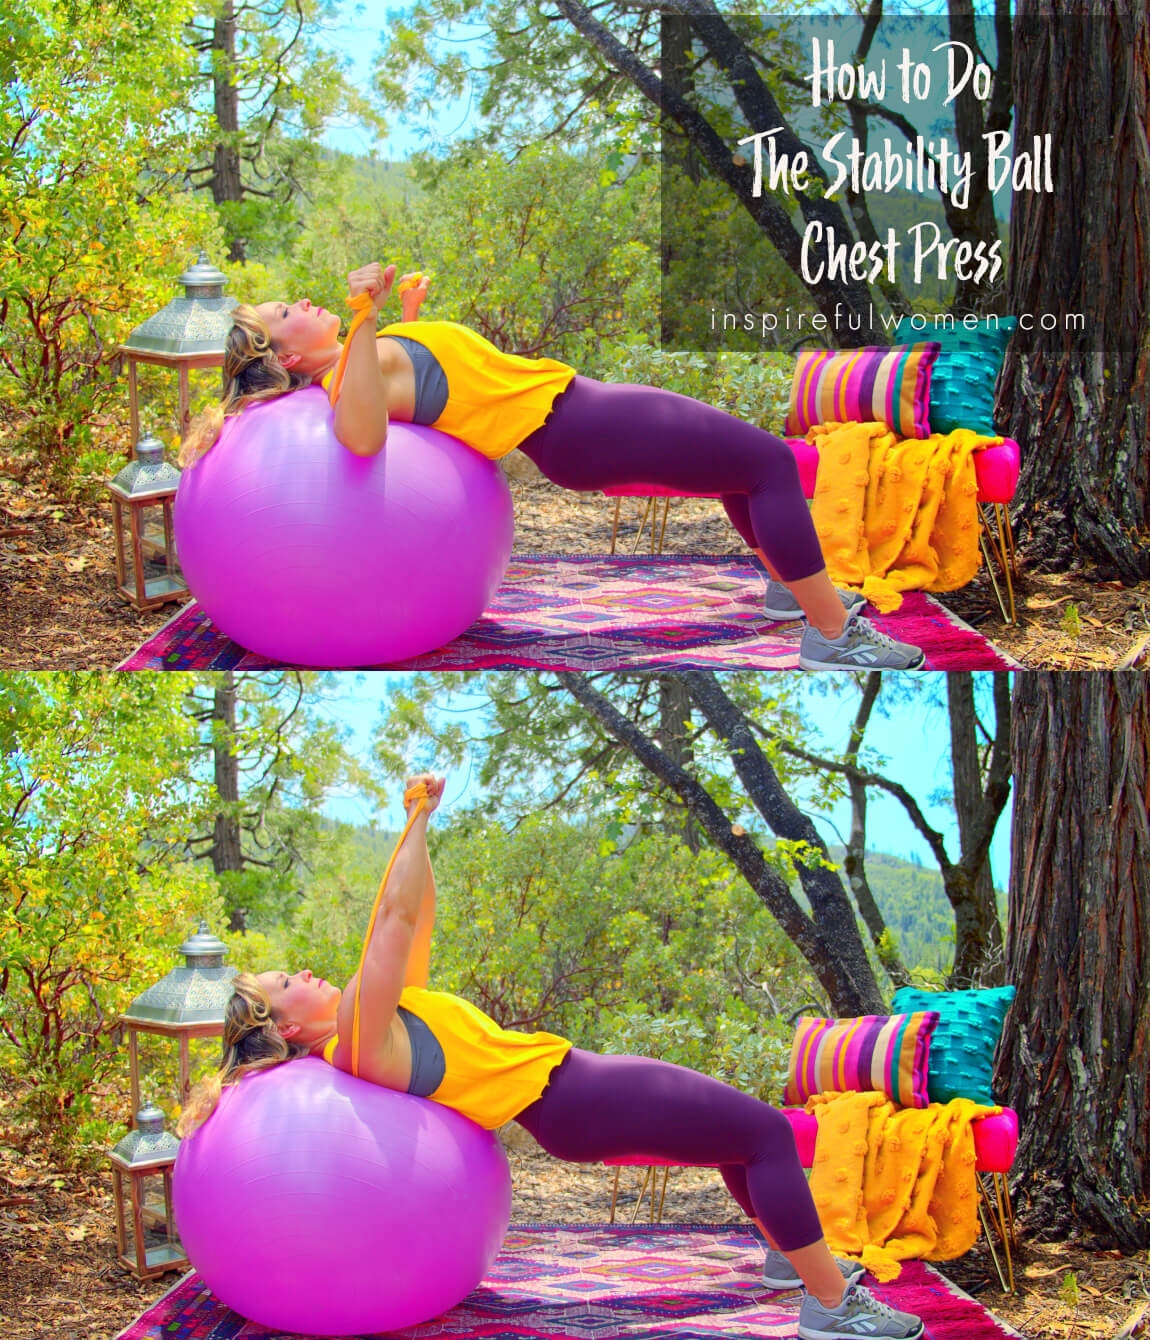 how-to-banded-stability-ball-chest-press-at-home-pectoralis-major-exercise-resistance-band-proper-form-side-view